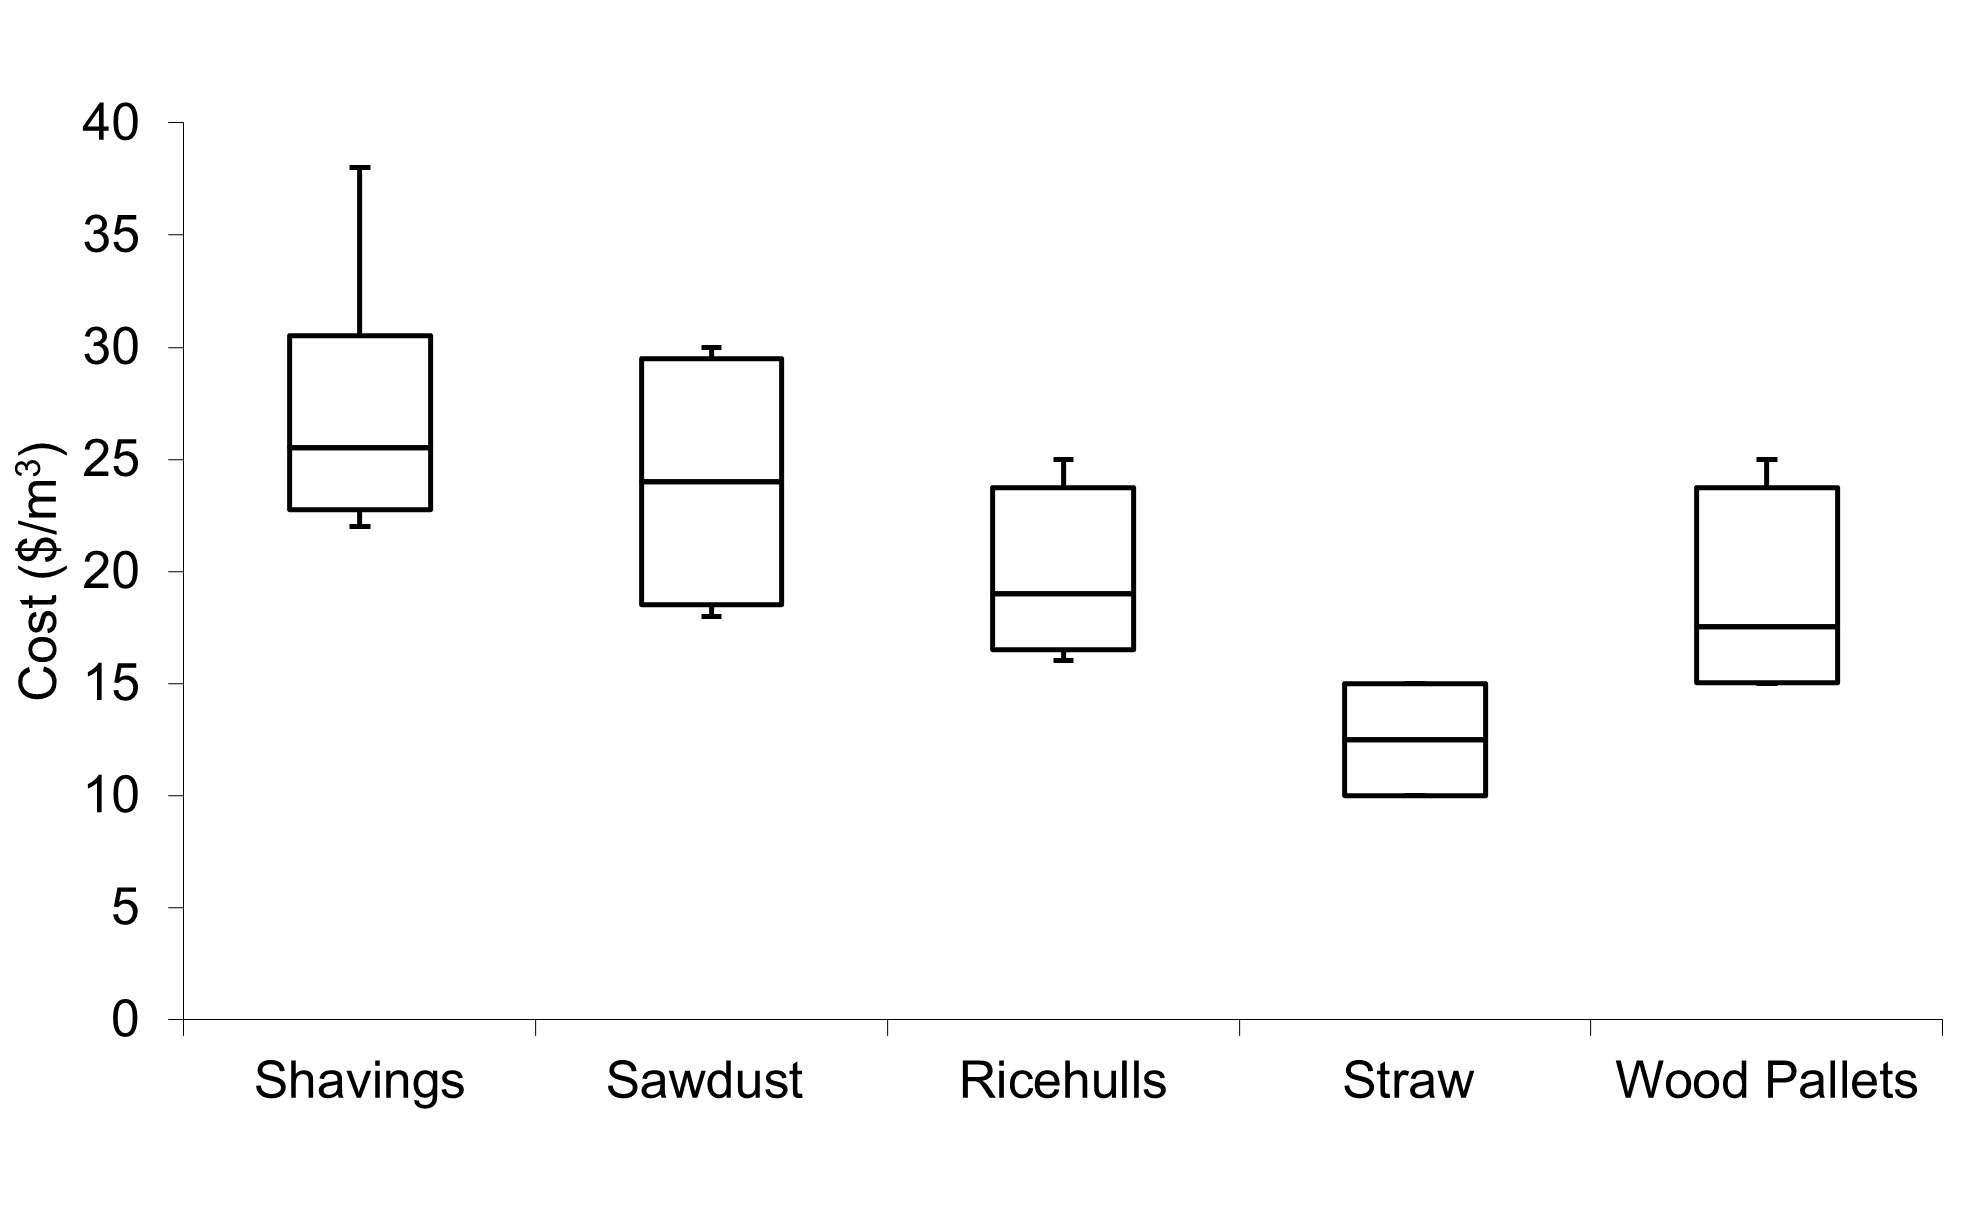 Graph showing price ranges for shavings, sawdust, rice hulls, straw, and wood pallets in dollars per cubic metre in 2018.